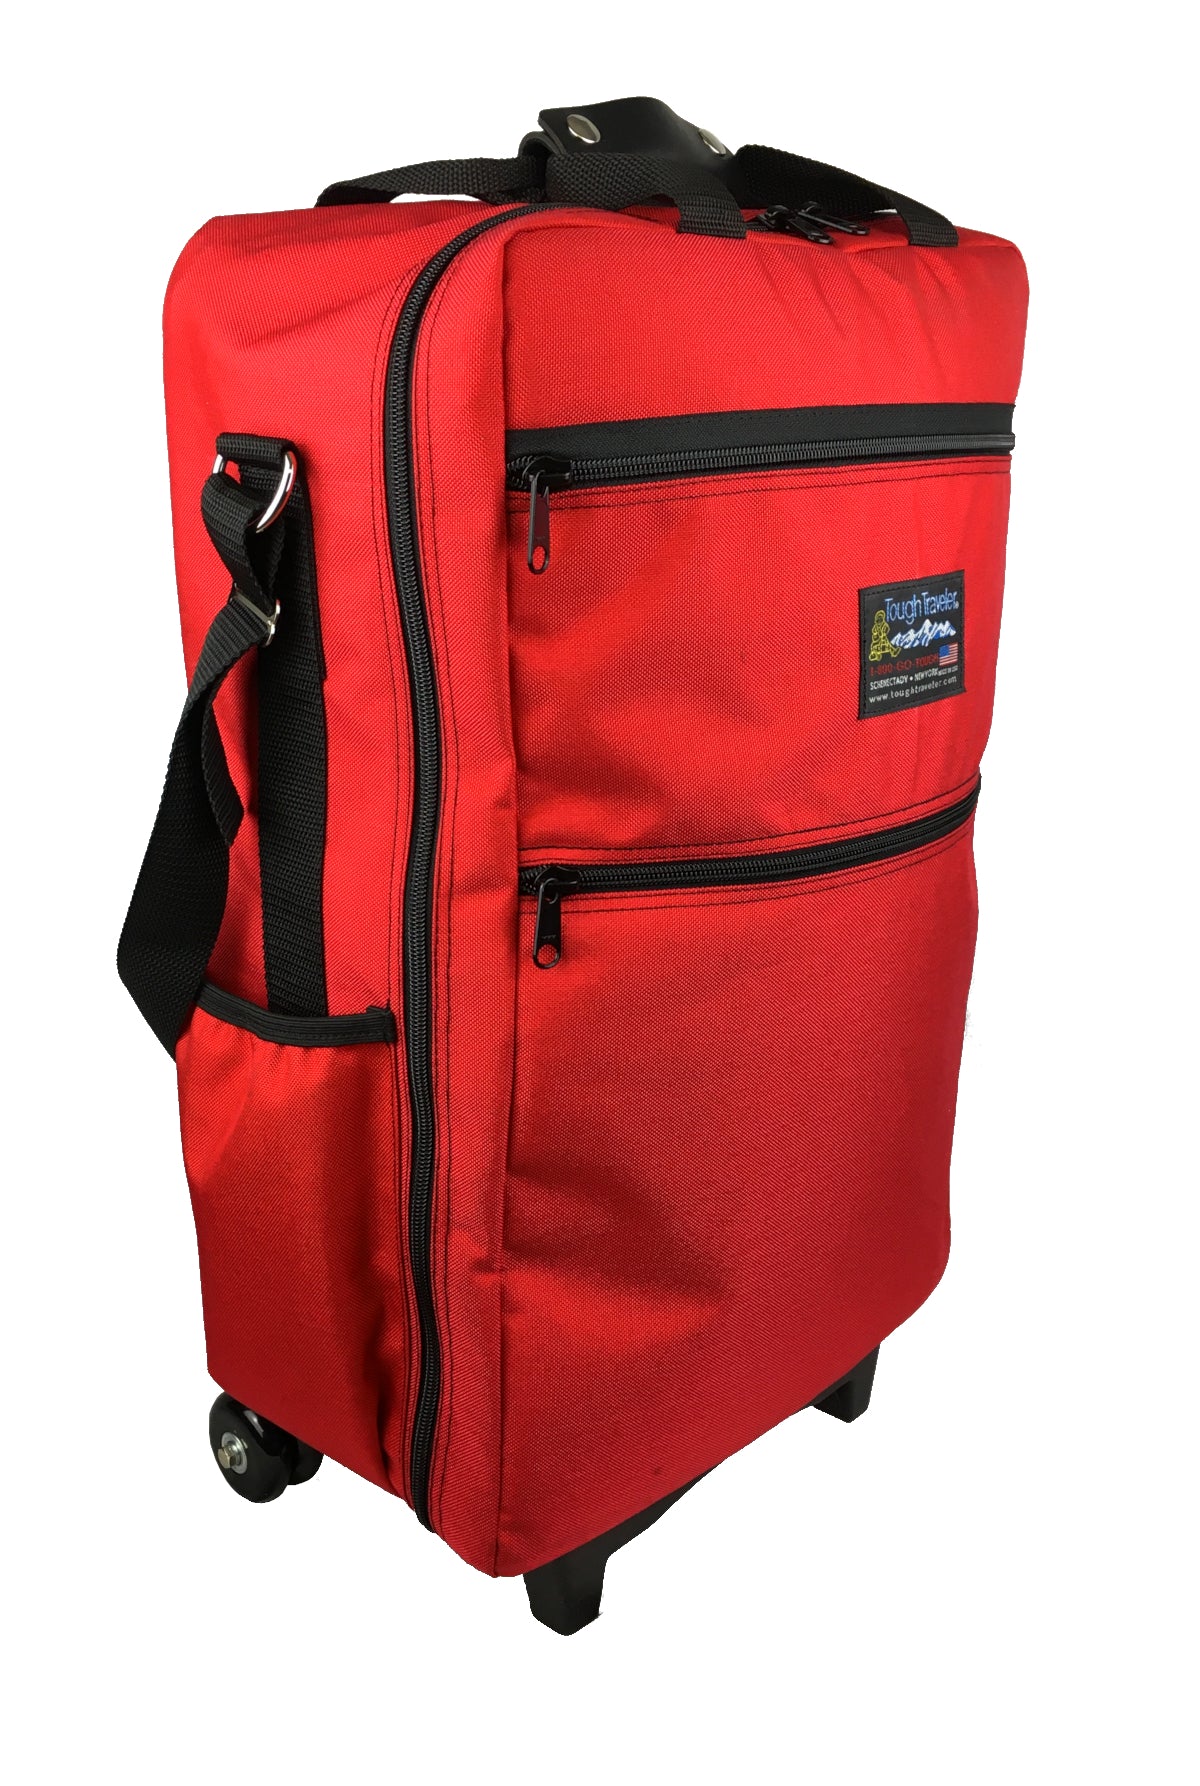 Trail Maker 55 Liter 24 inch Lightweight Canvas Duffle Bags for Men & Women for Traveling The Gym and As Sports Equipment Bag/Organizer (Red 1)